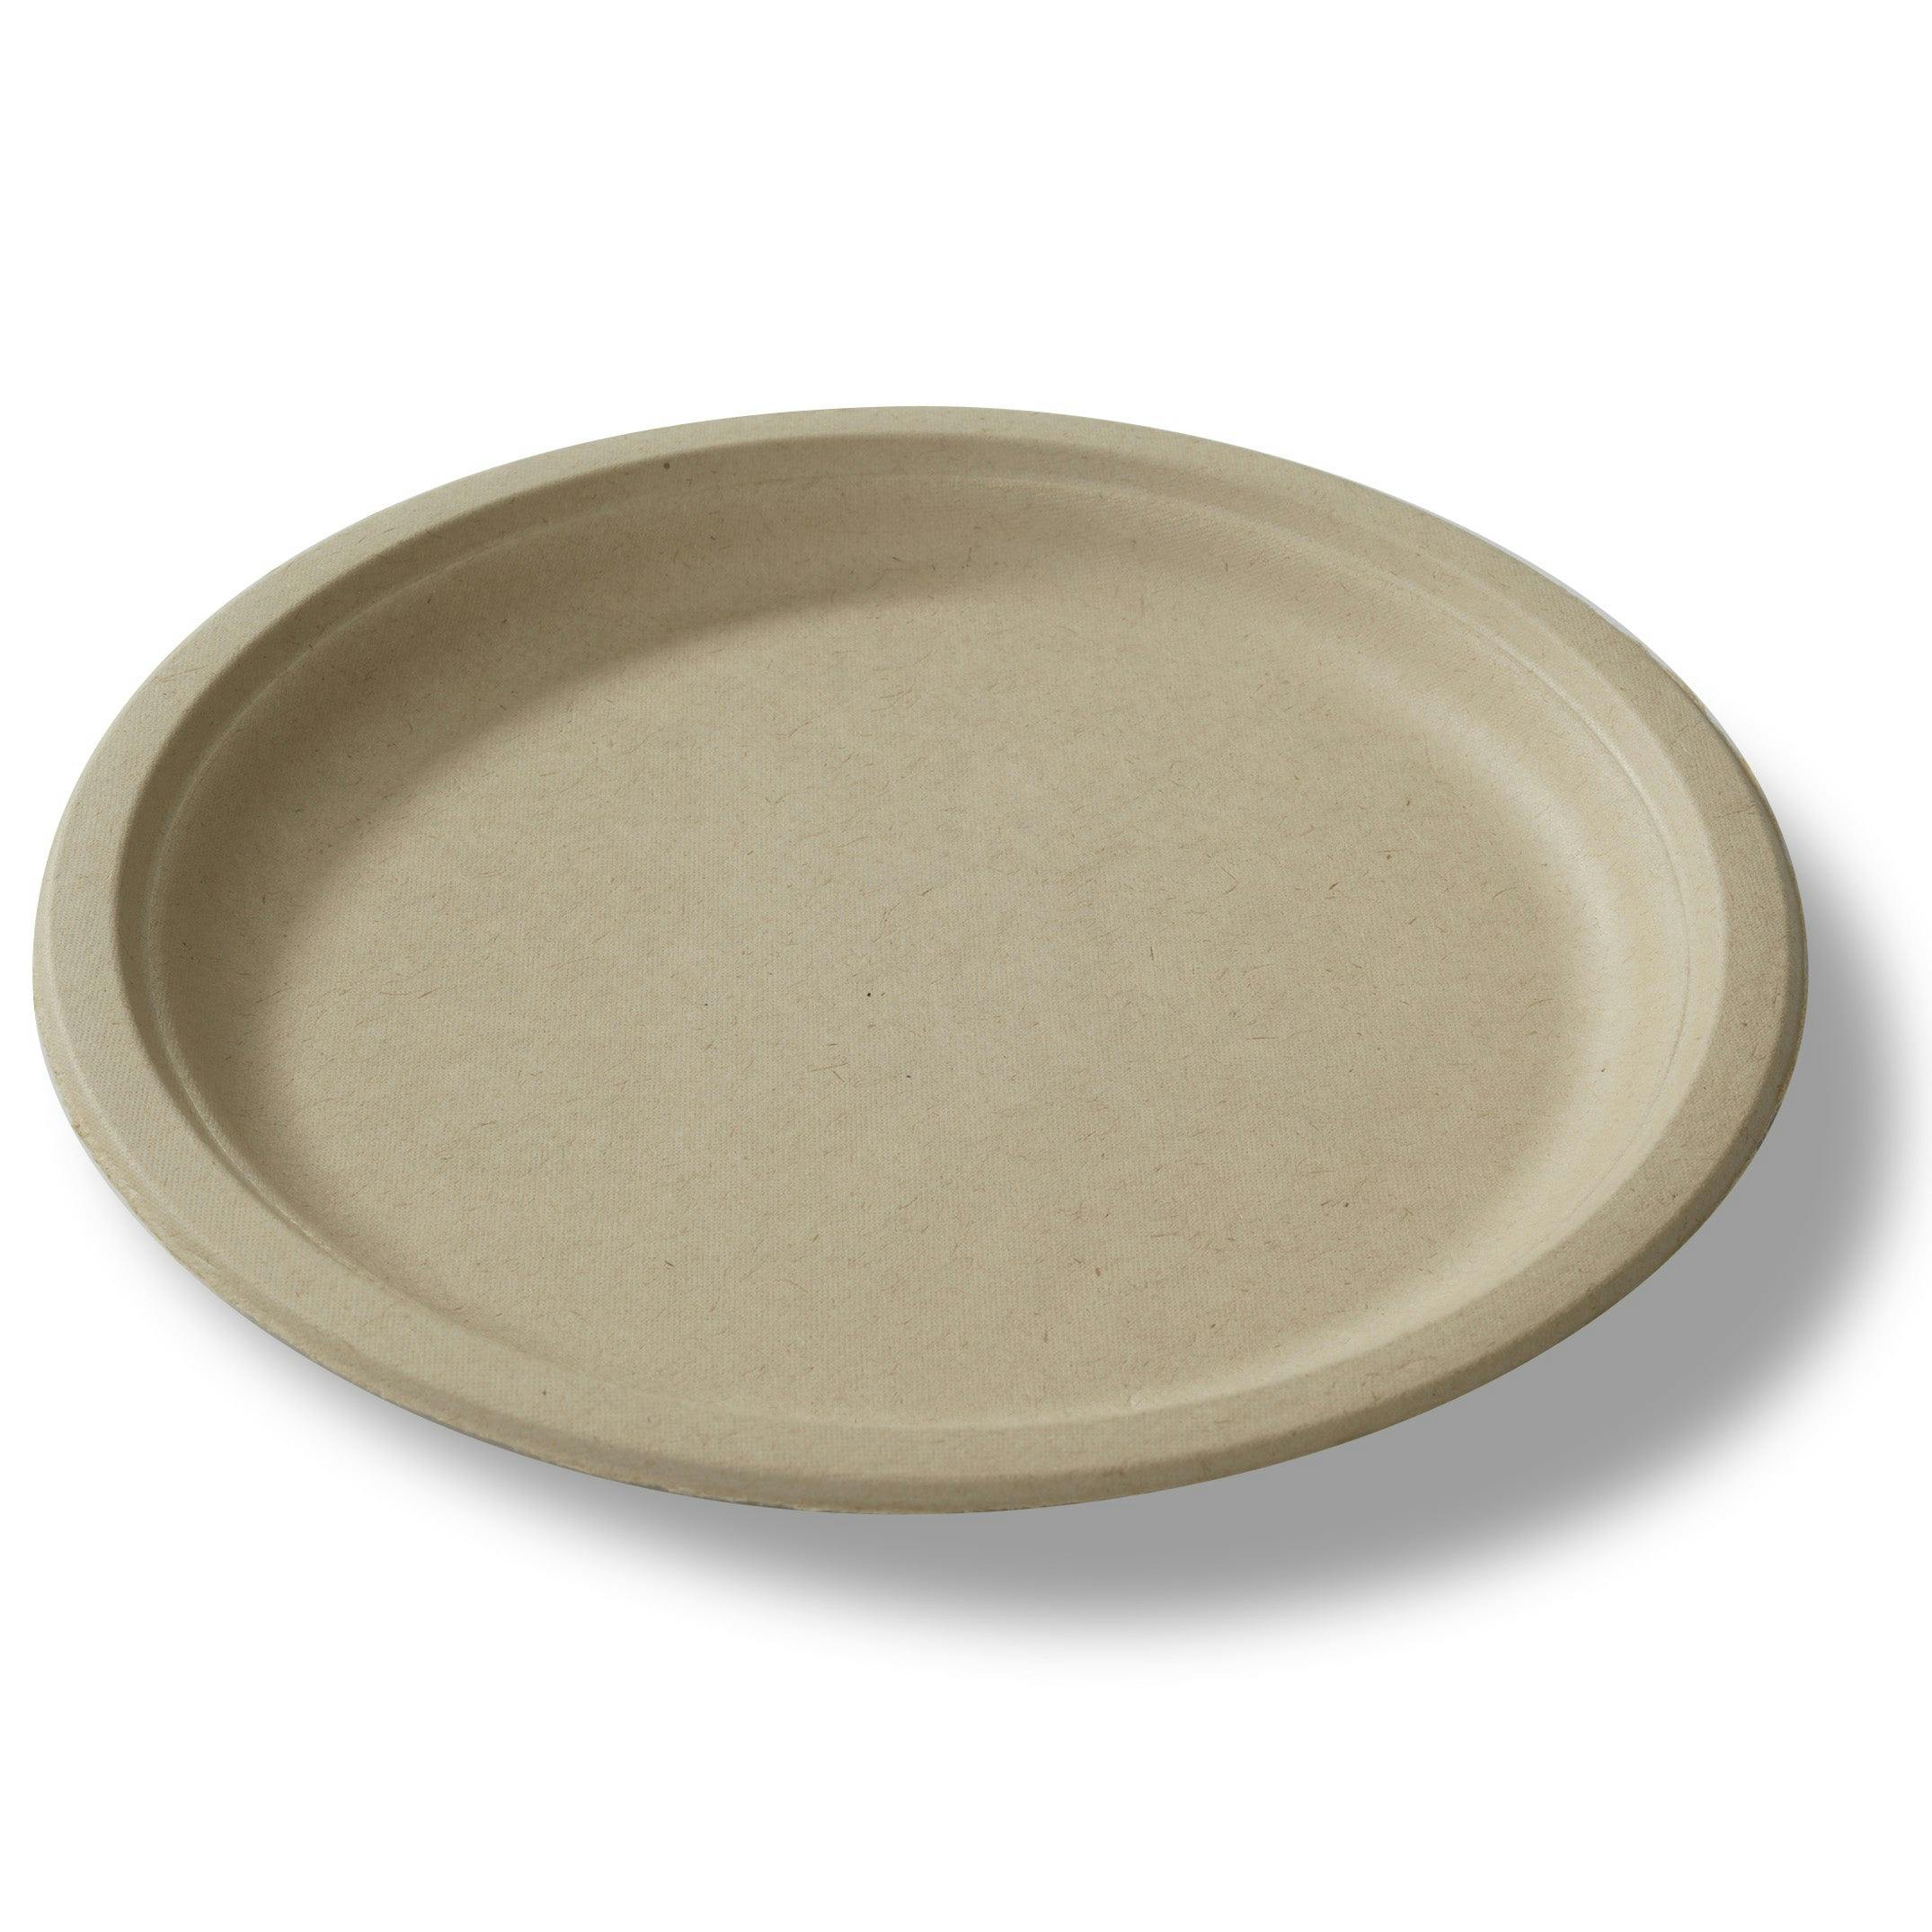 Ten inch brown biodegradable round plate on white background